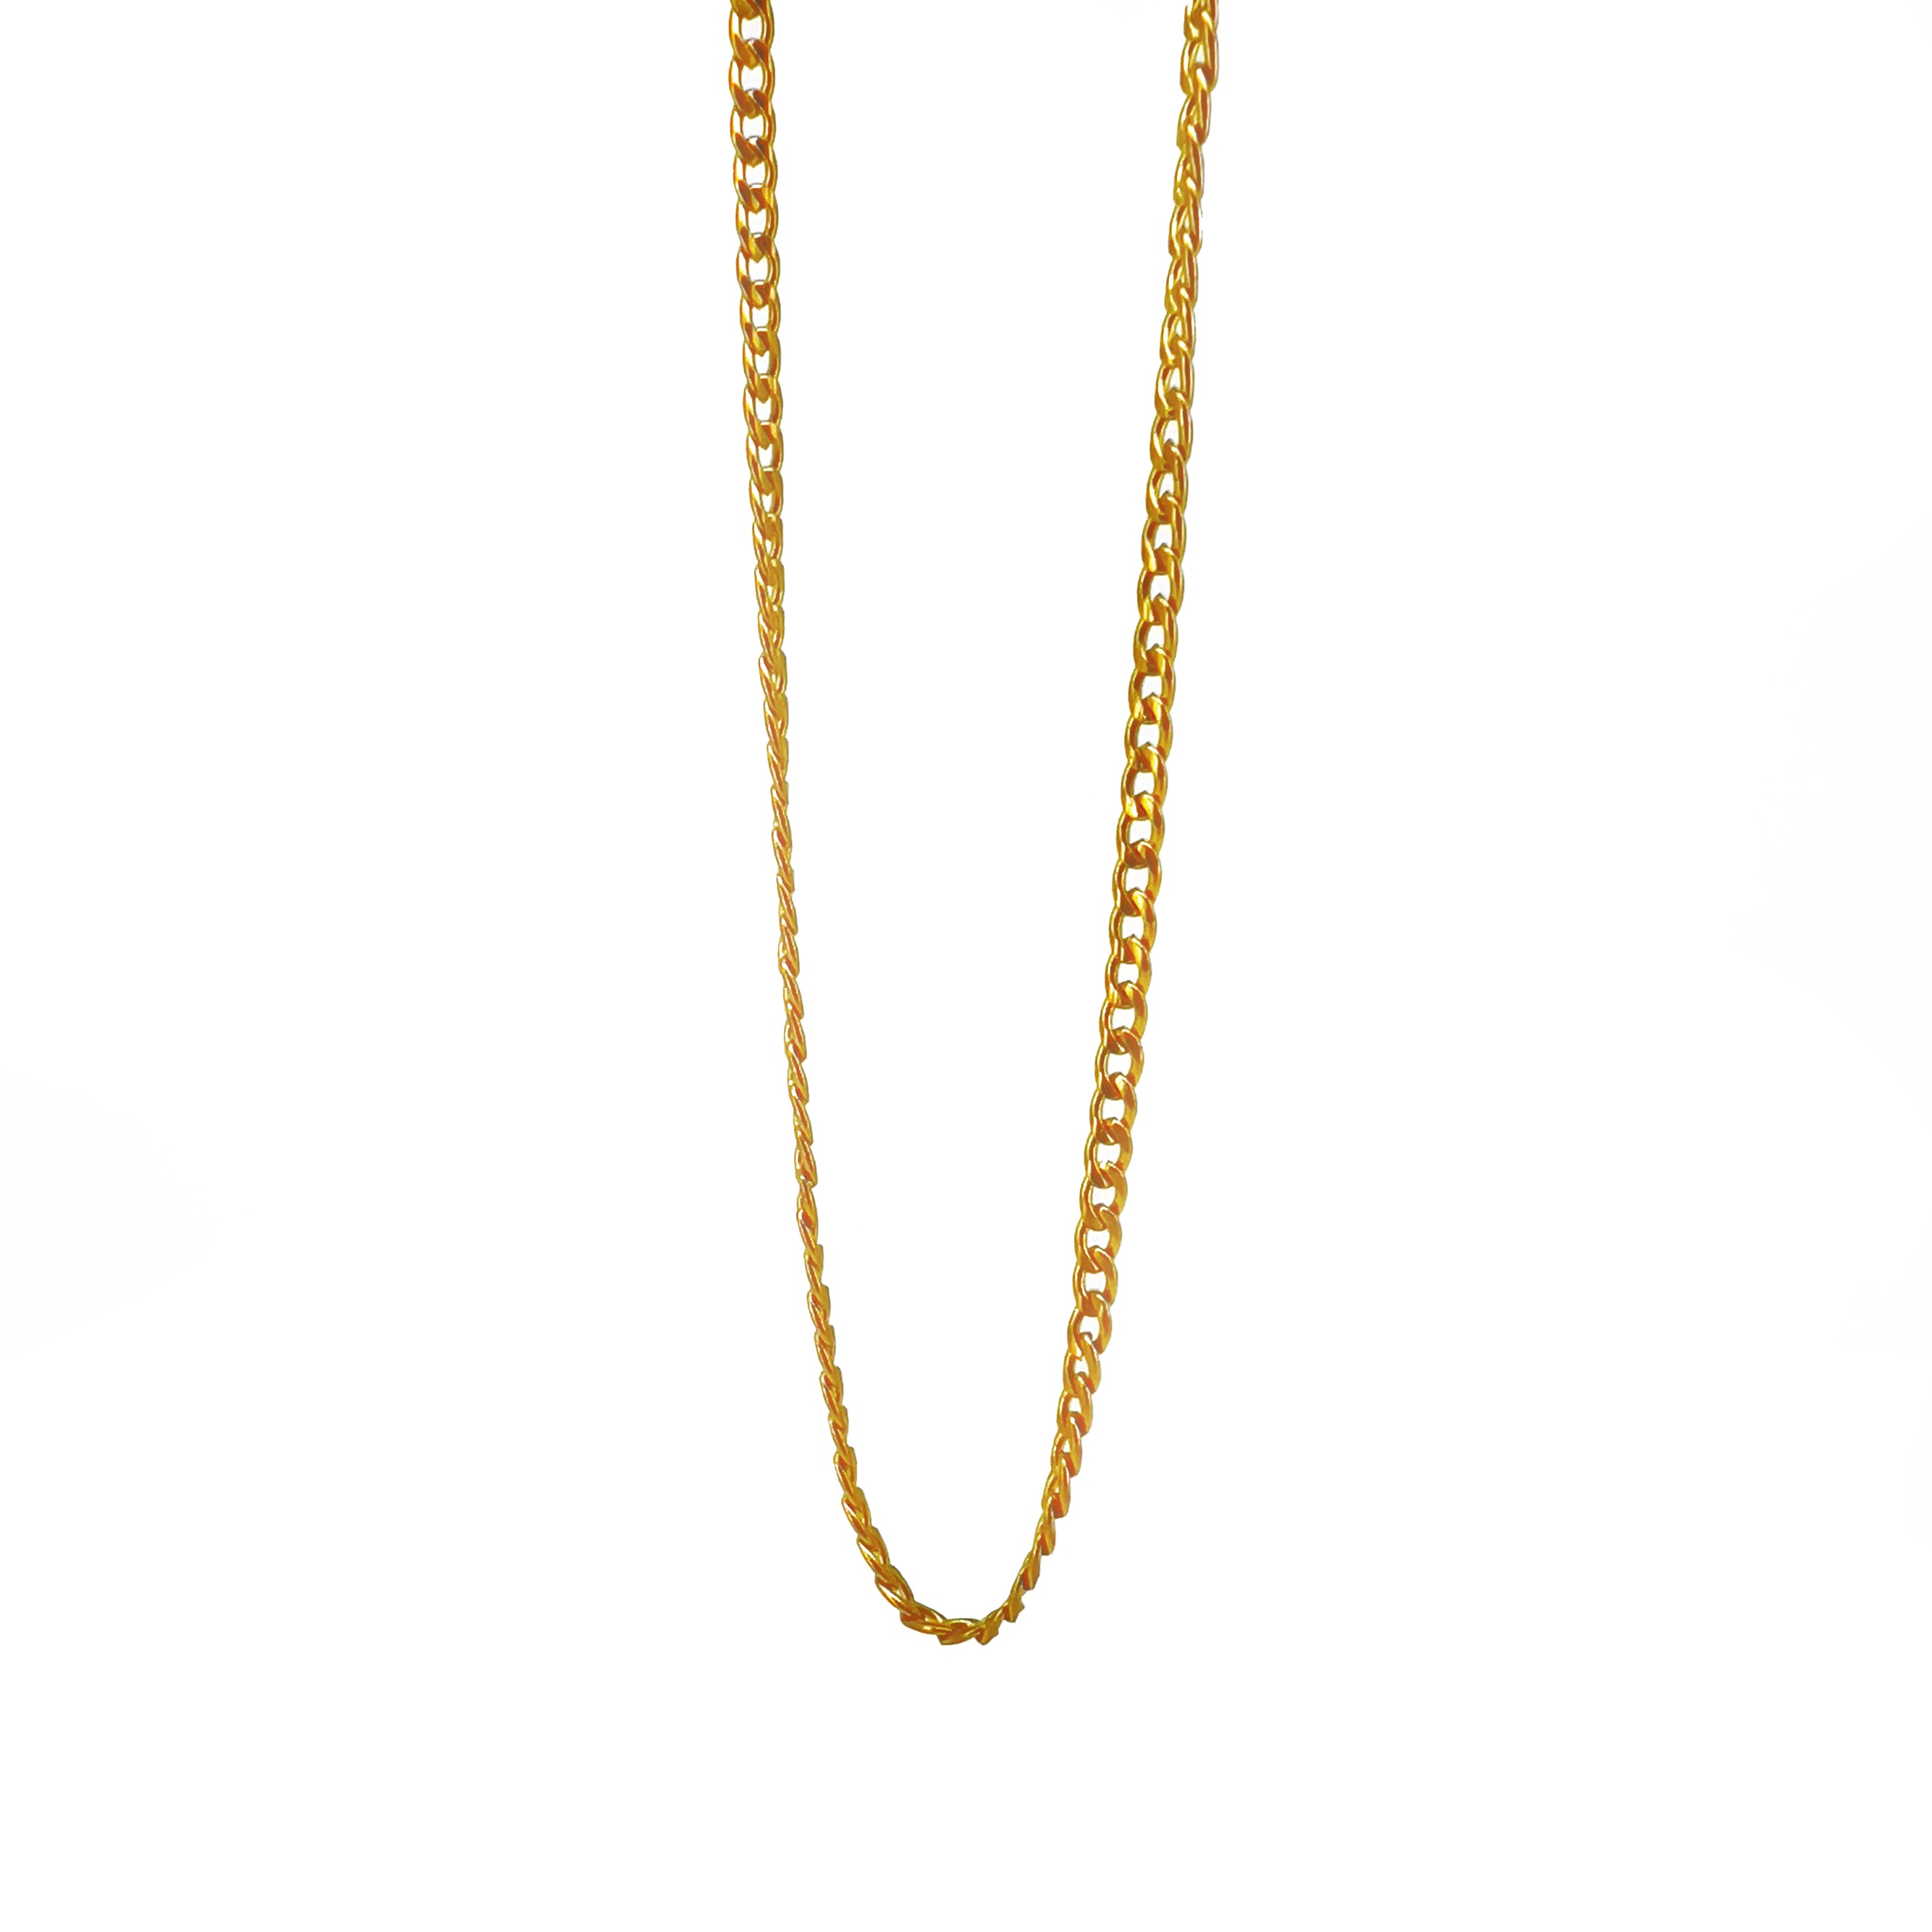 Fortunato Stainless Steel Curb Chain Necklace